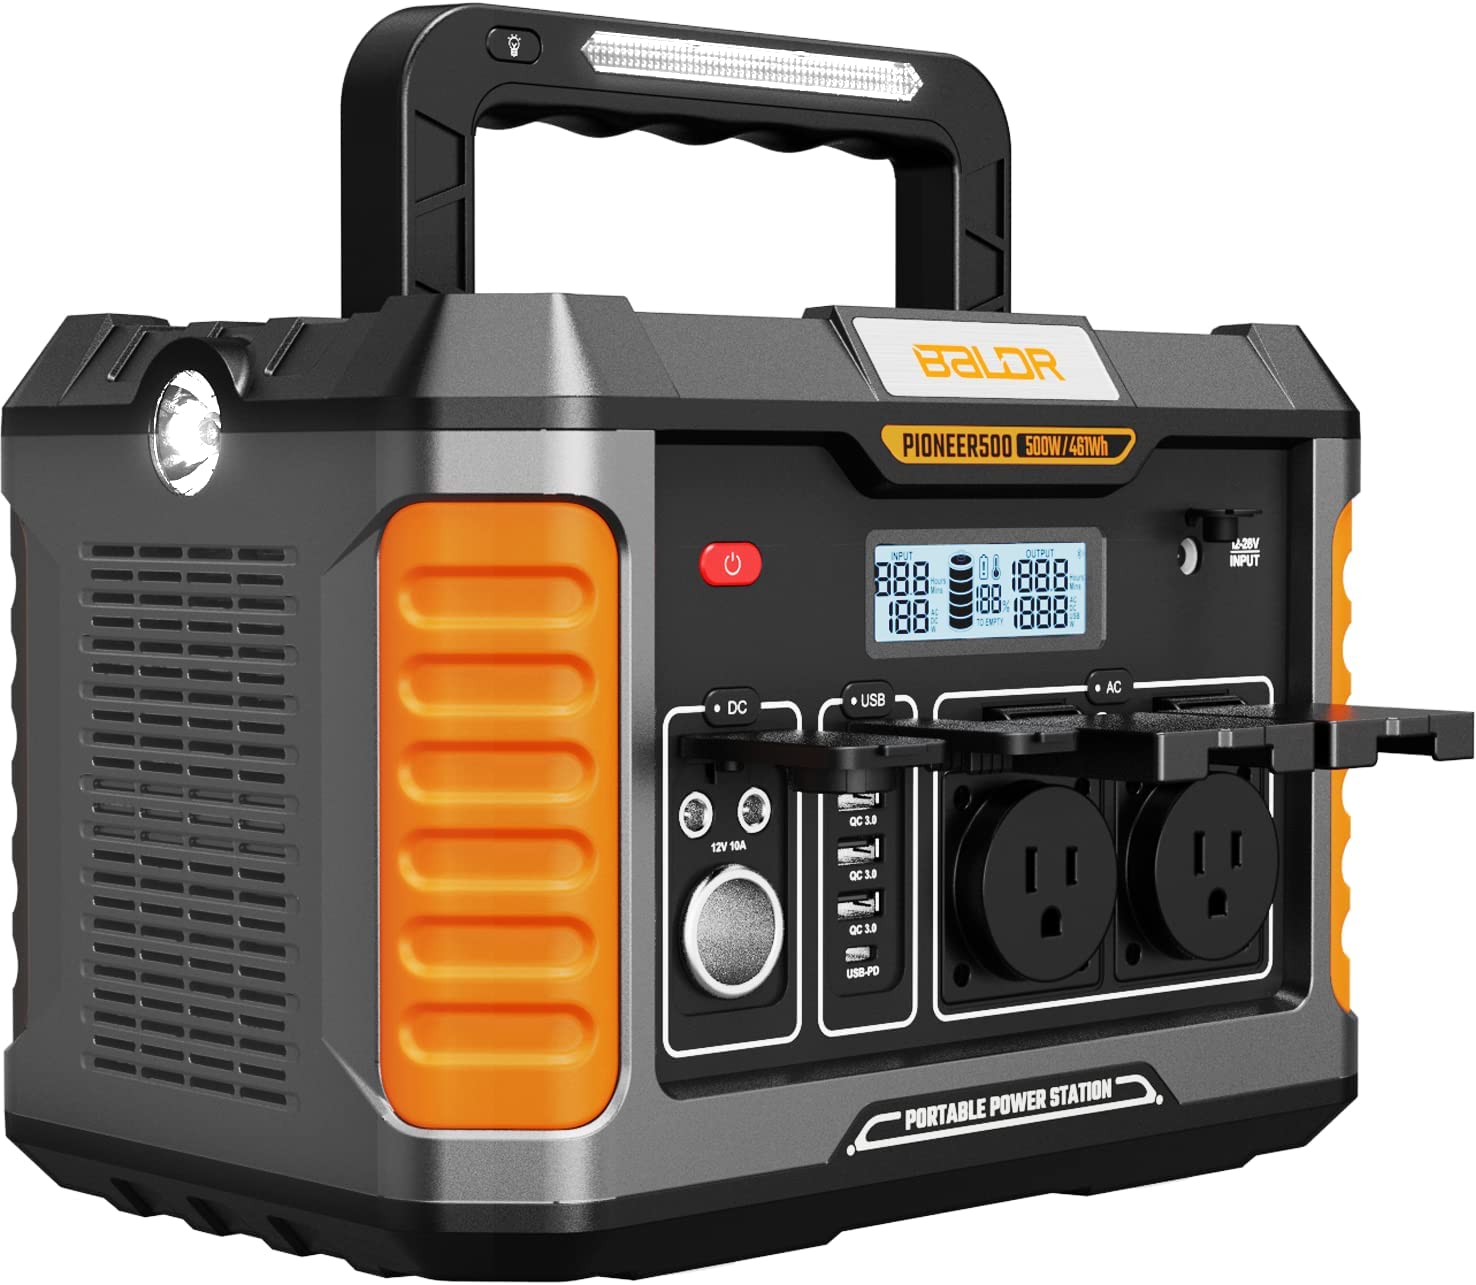 Portable Power Station 500W, BALDR 461Wh Solar Generator with 110V Pure Sine Wave AC Outlets, 12V Regulated DC, USB PD Output, Battery Power Generator for Camping RV/CAPA/Emergency(Solar Panel Optional)